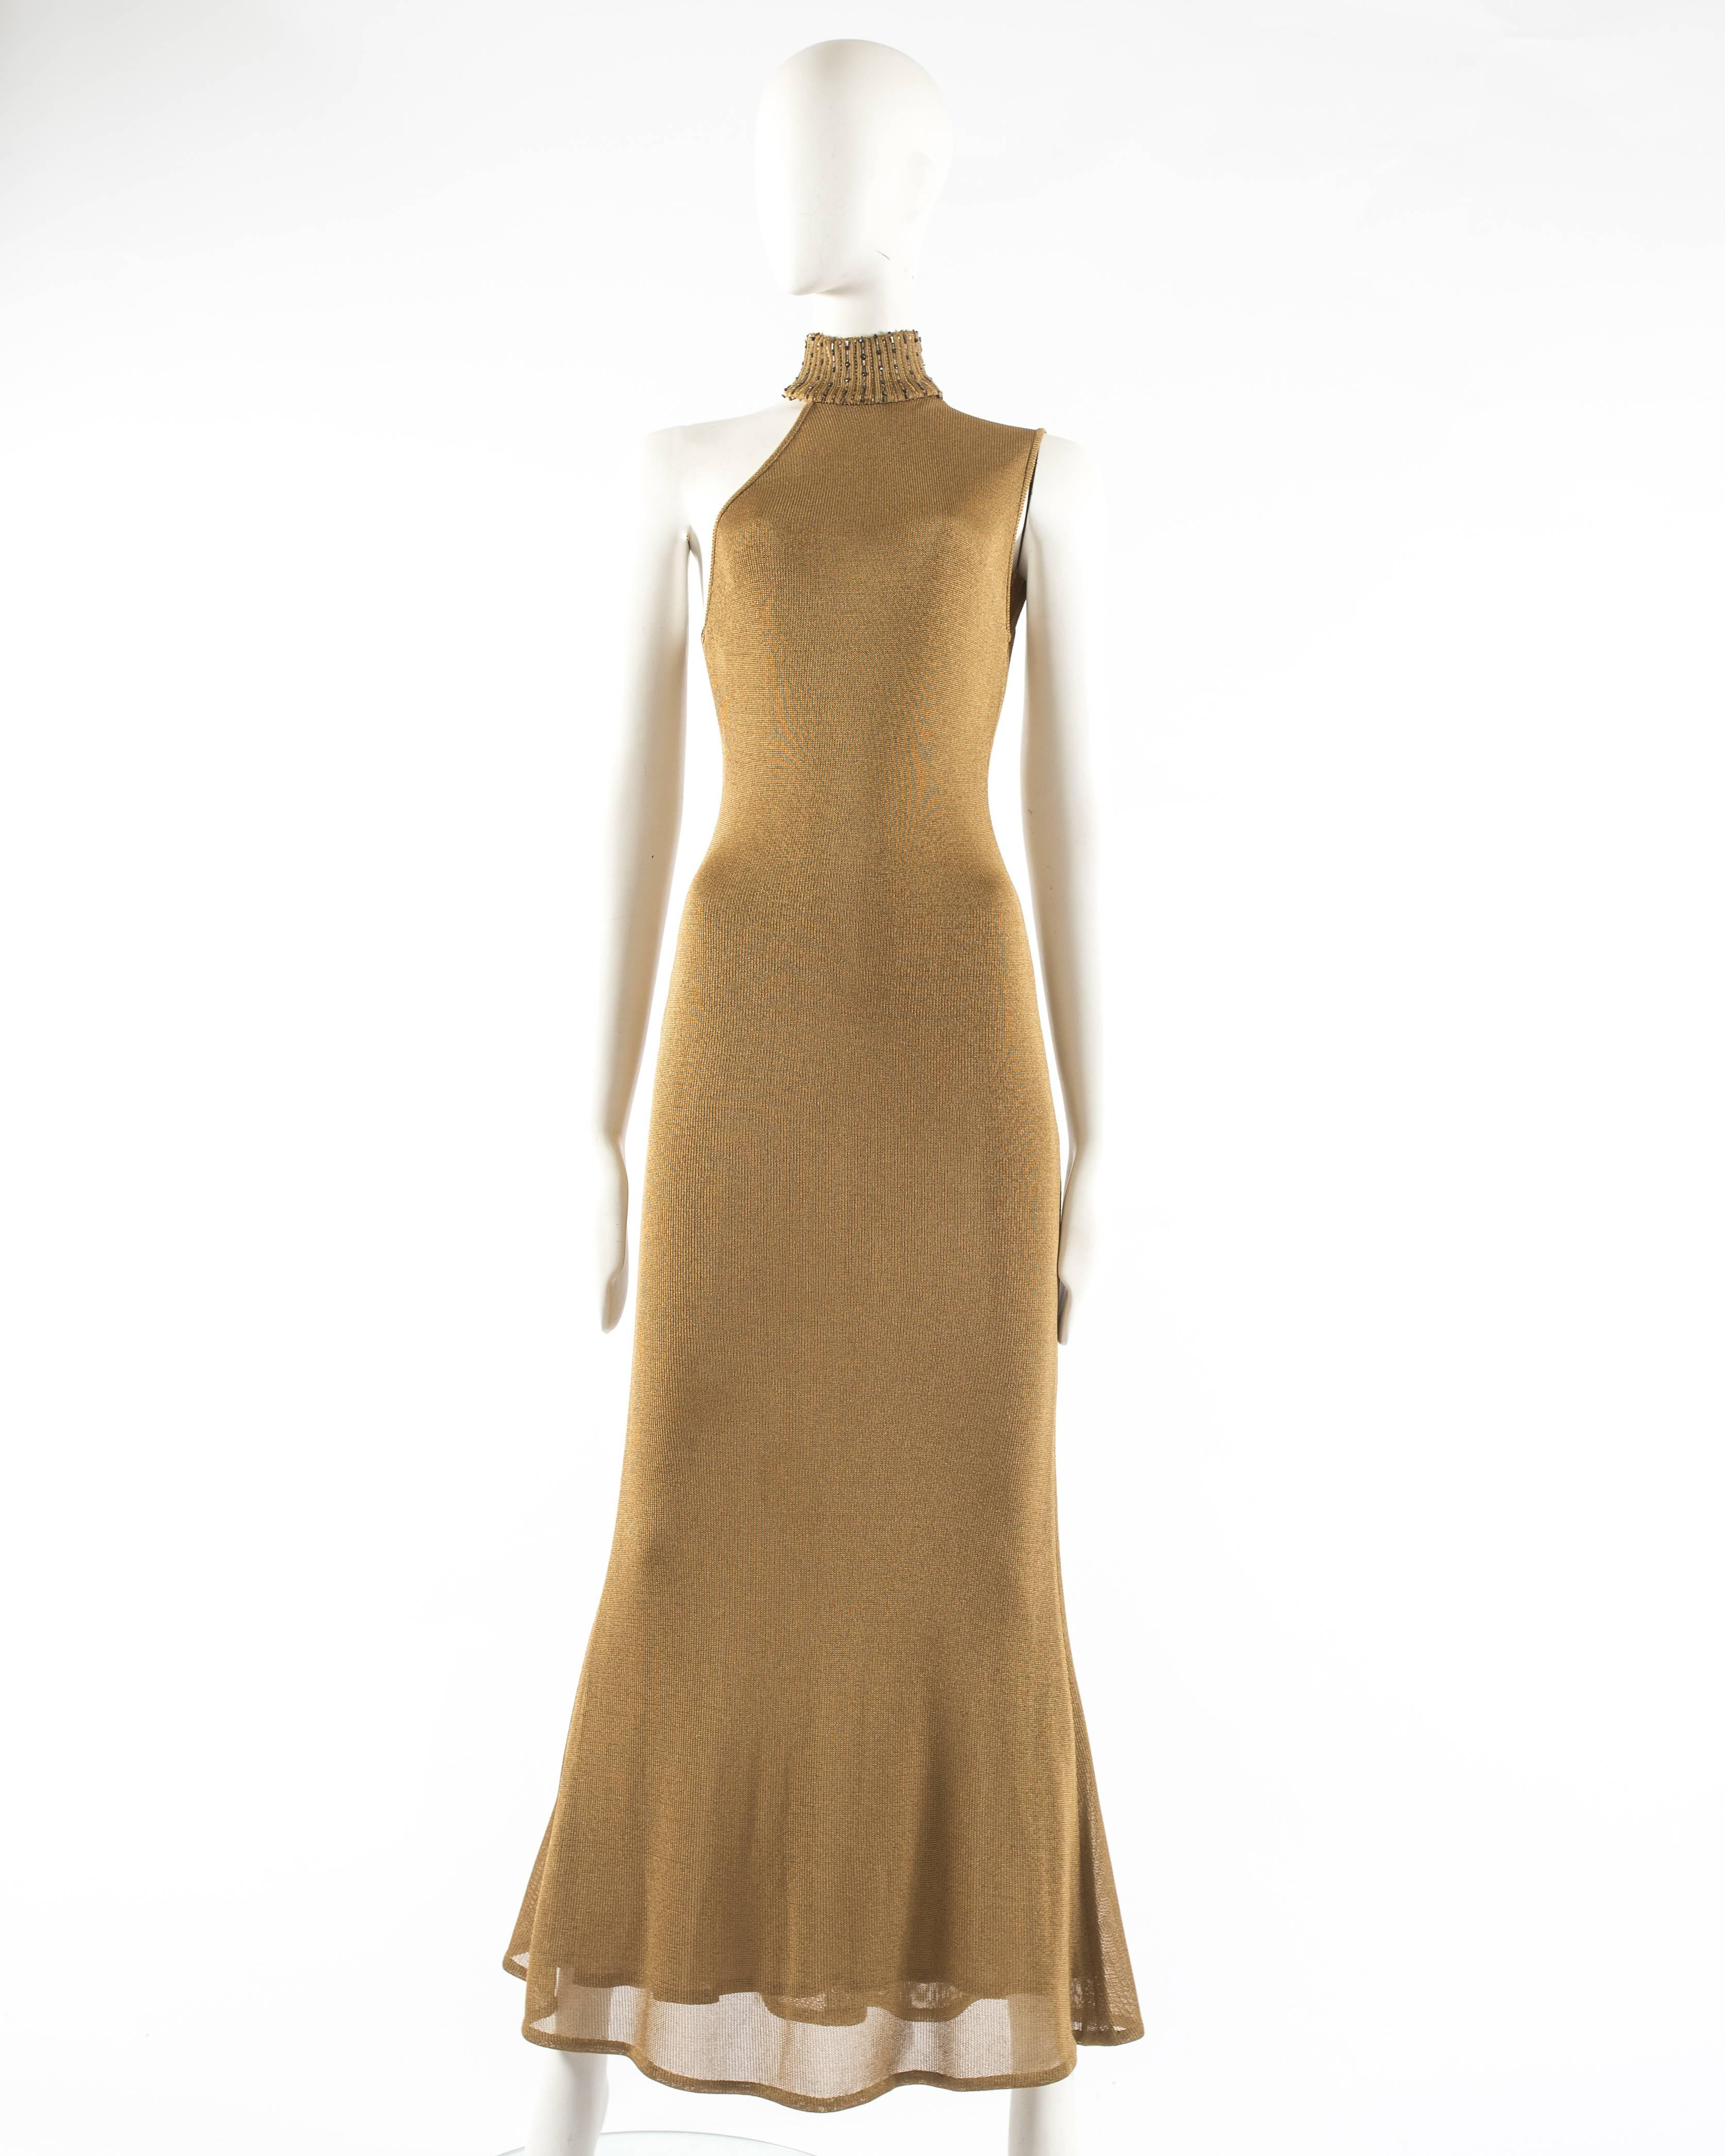 Gianni Versace 1997 gold knitted evening dress

- beaded ribbed turtle neck
- asymmetric design 
- flared skirt 
- zip closure at the back